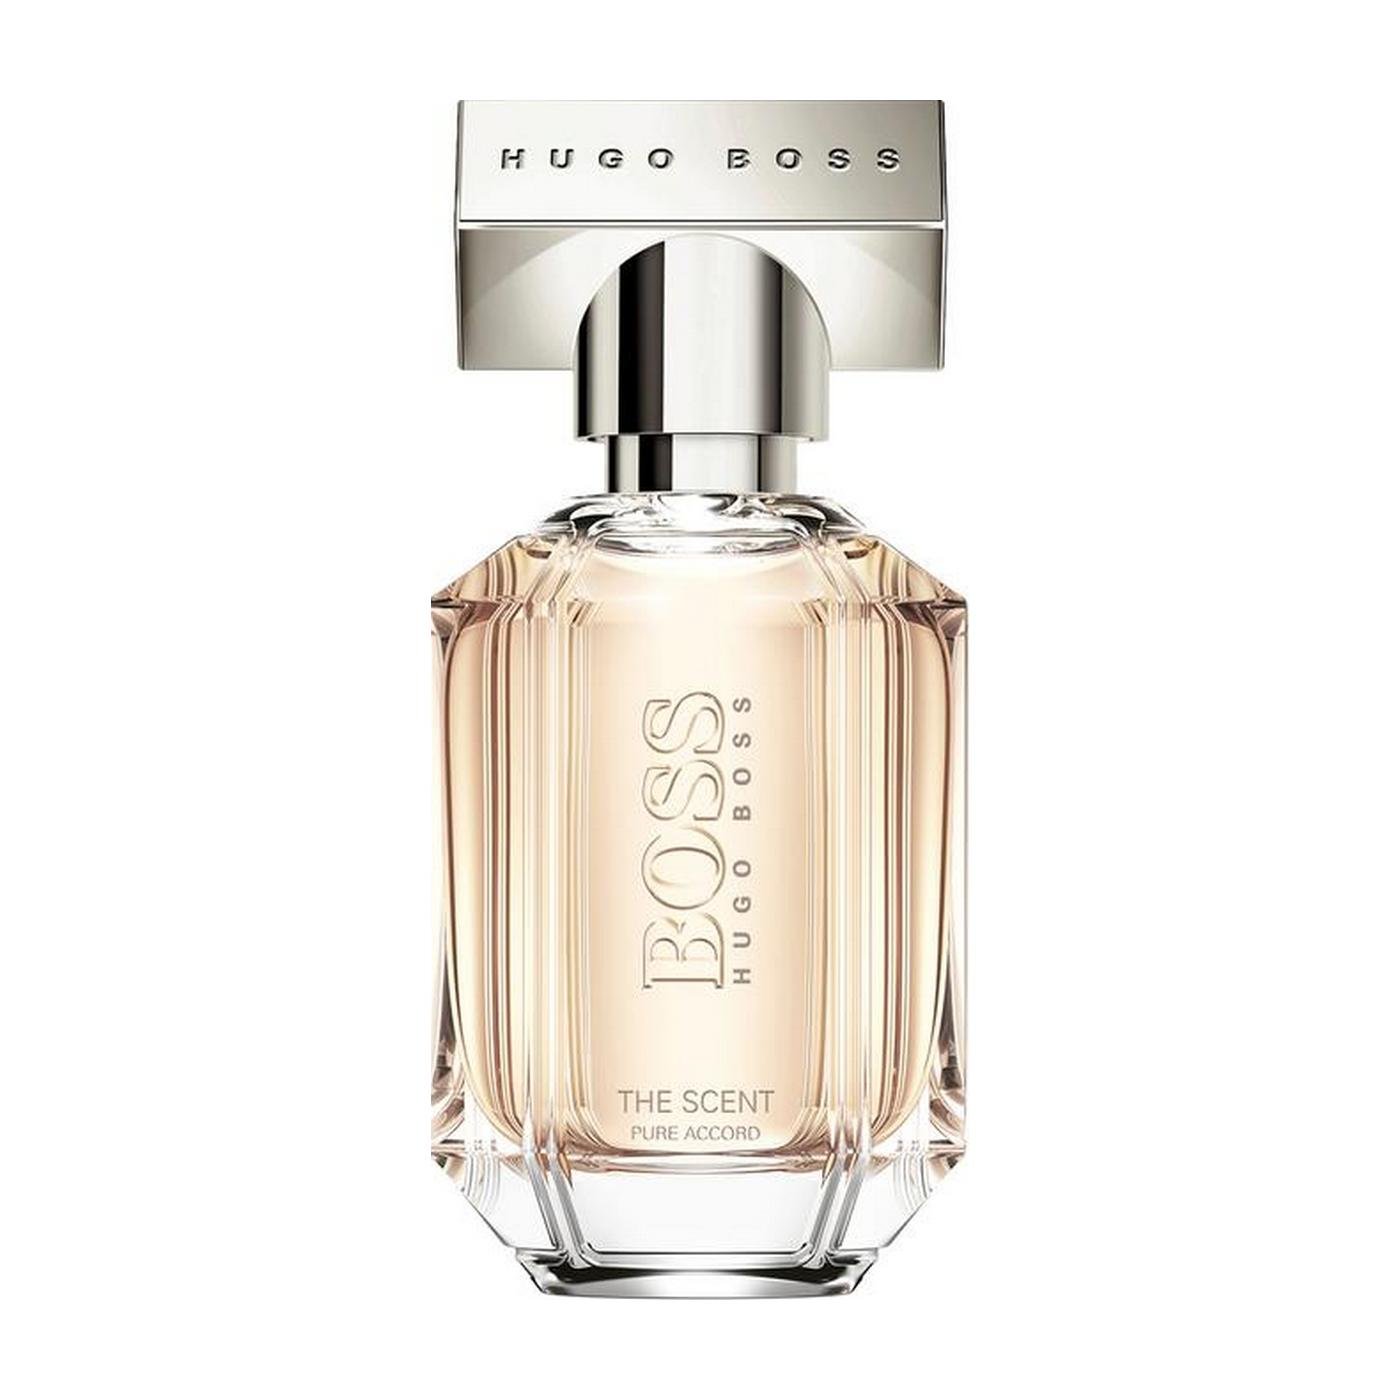 Туалетная вода Hugo Boss The Scent Pure Accord for her 30 мл remtekey smart remote key 3button with panic for honda key oucg8d 380h a 313 8mhz id46 for honda accord 2003 2004 2005 2006 2007